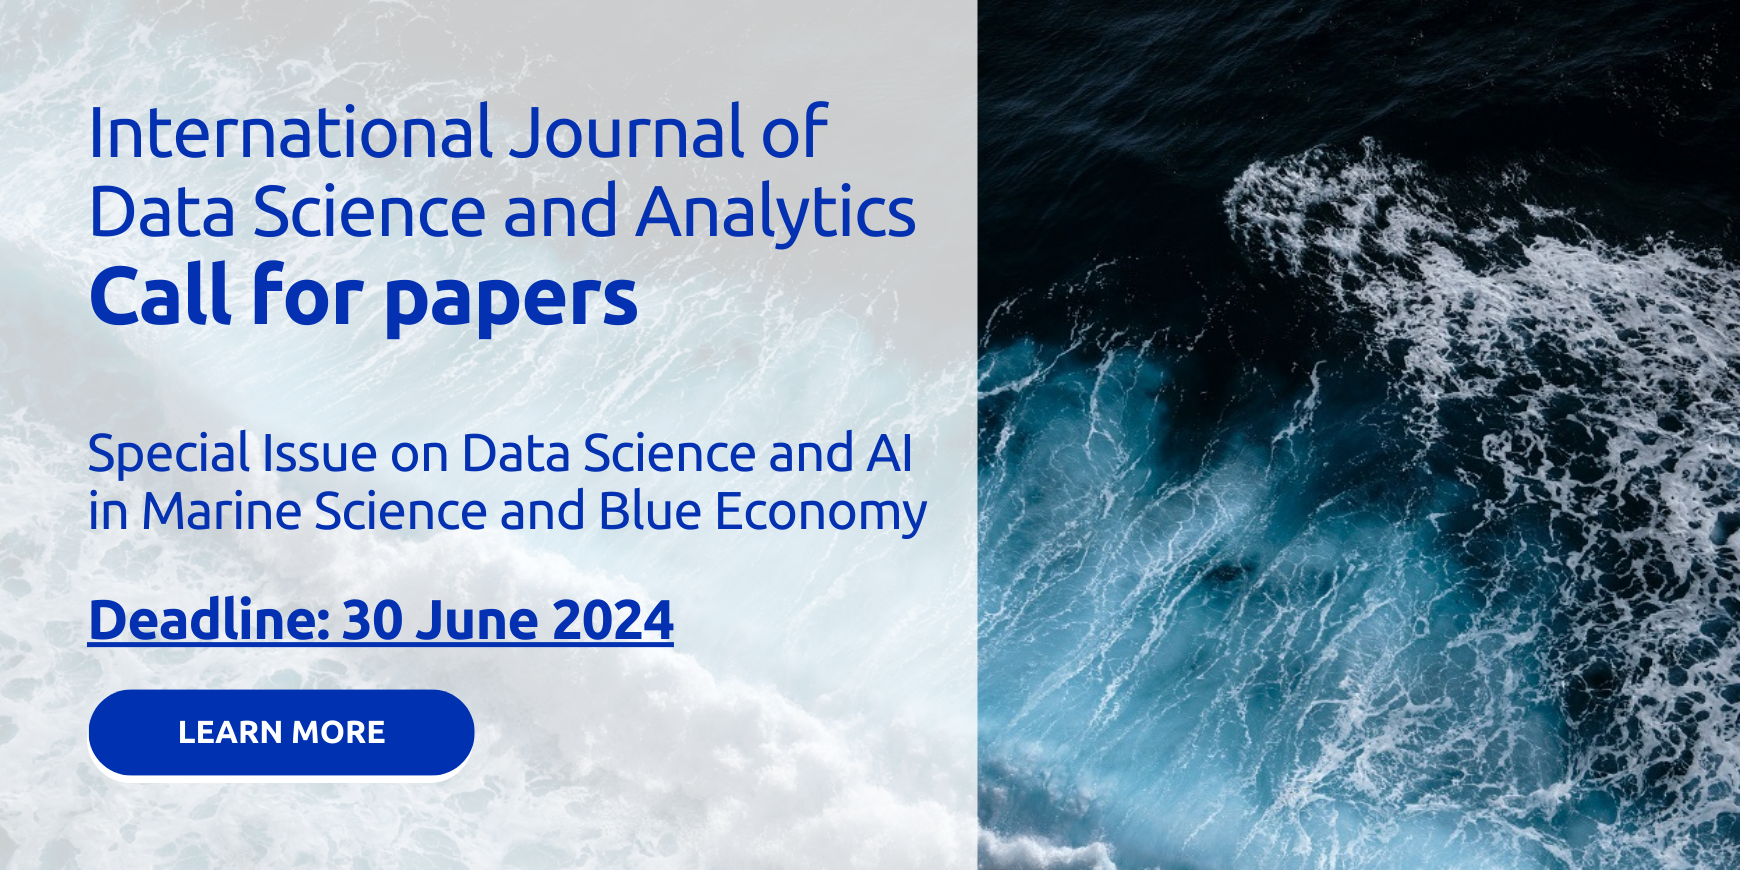 International Journal of Data Science and Analytics Call for Papers: Special Issue on Data Science and AI in Marine Science and Blue Economy